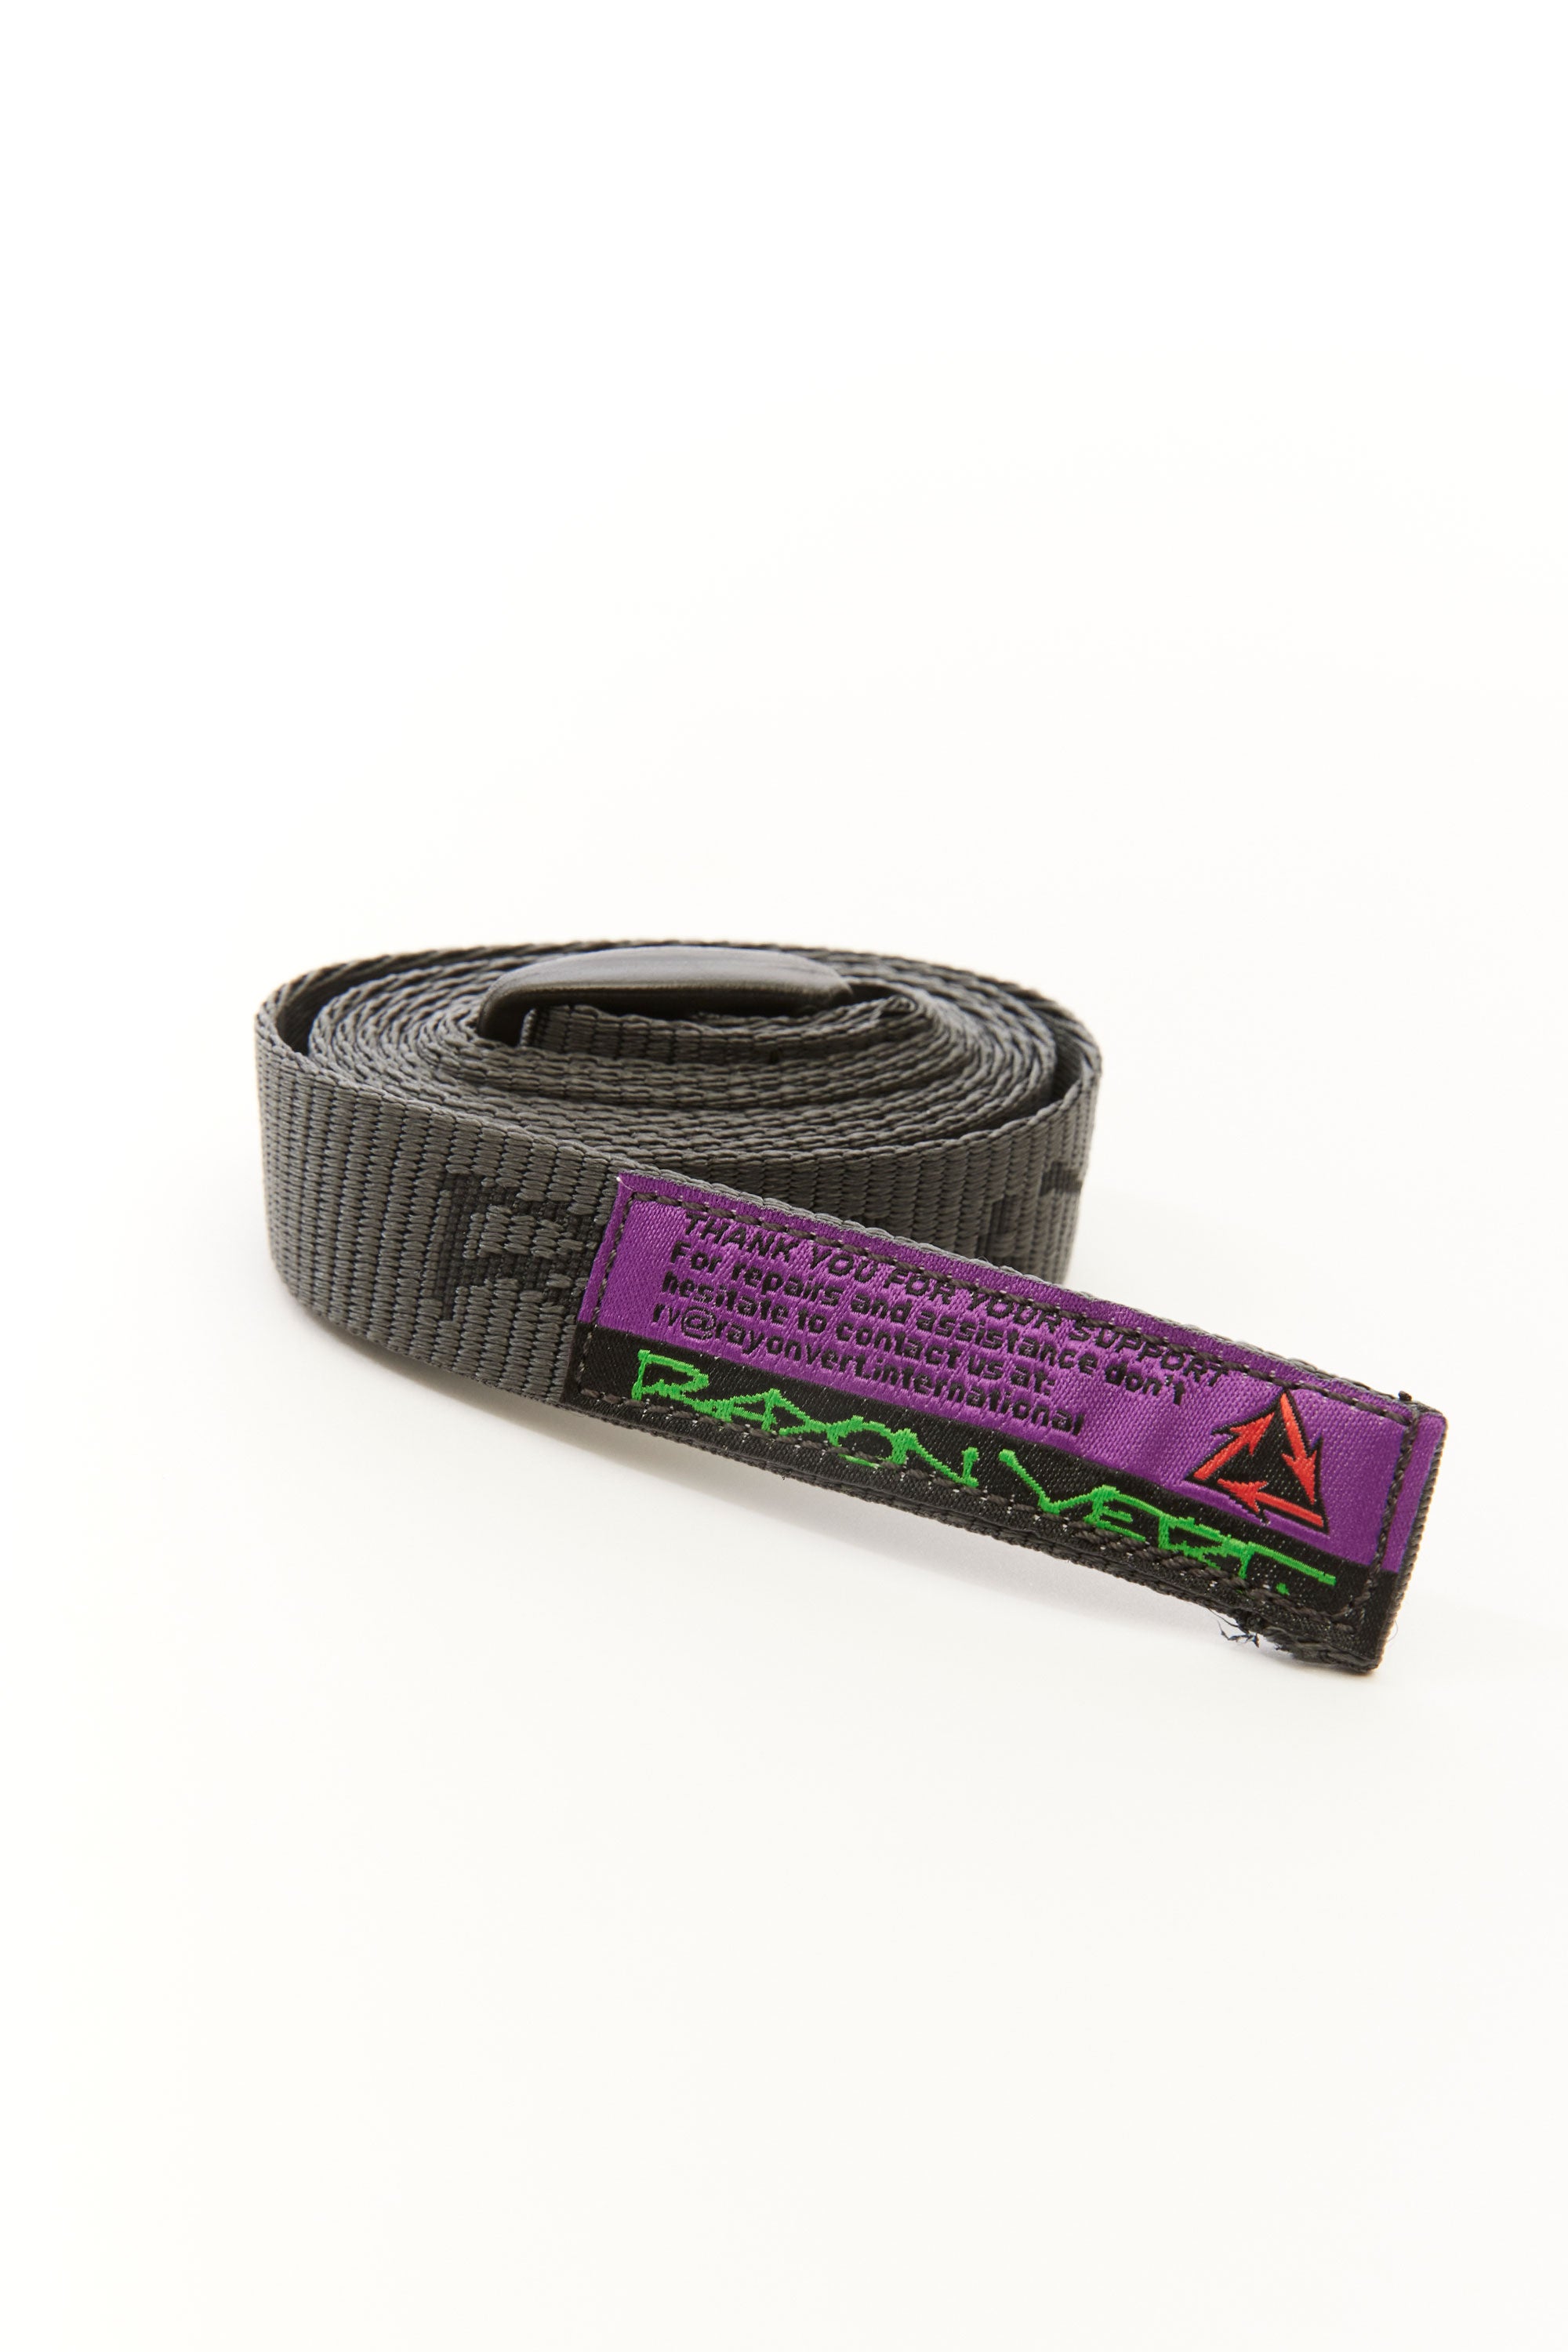 The RAYON VERT - LADDERLOCK RAYON BELT 2CM BASALT GREY available online with global shipping, and in PAM Stores Melbourne and Sydney.